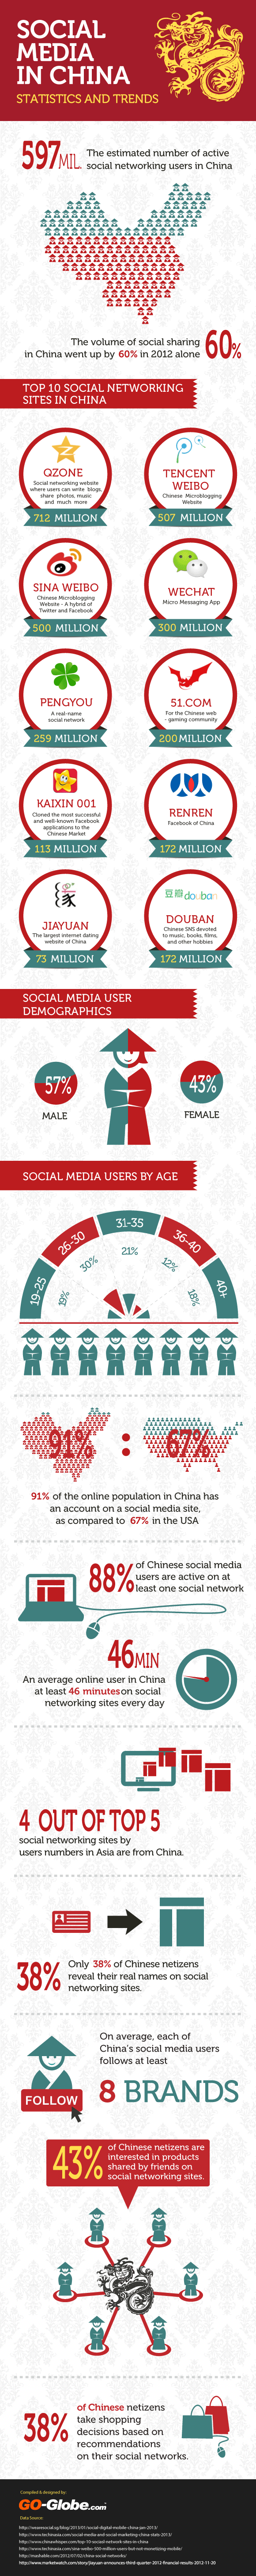 Social Media Usage In China Infographic